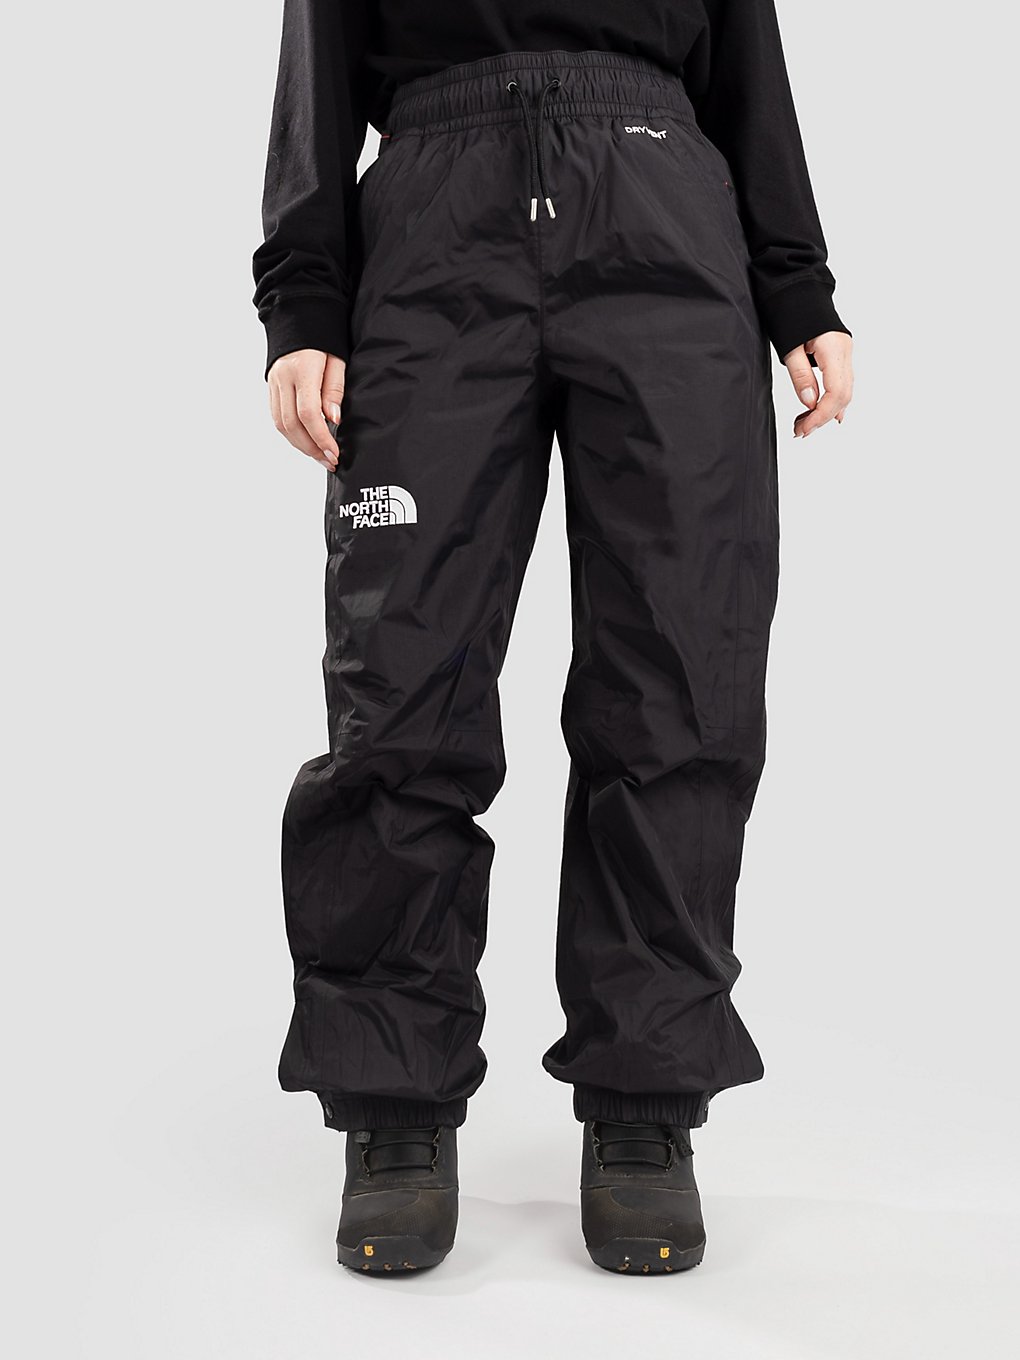 THE NORTH FACE Build Up Hose tnf black kaufen